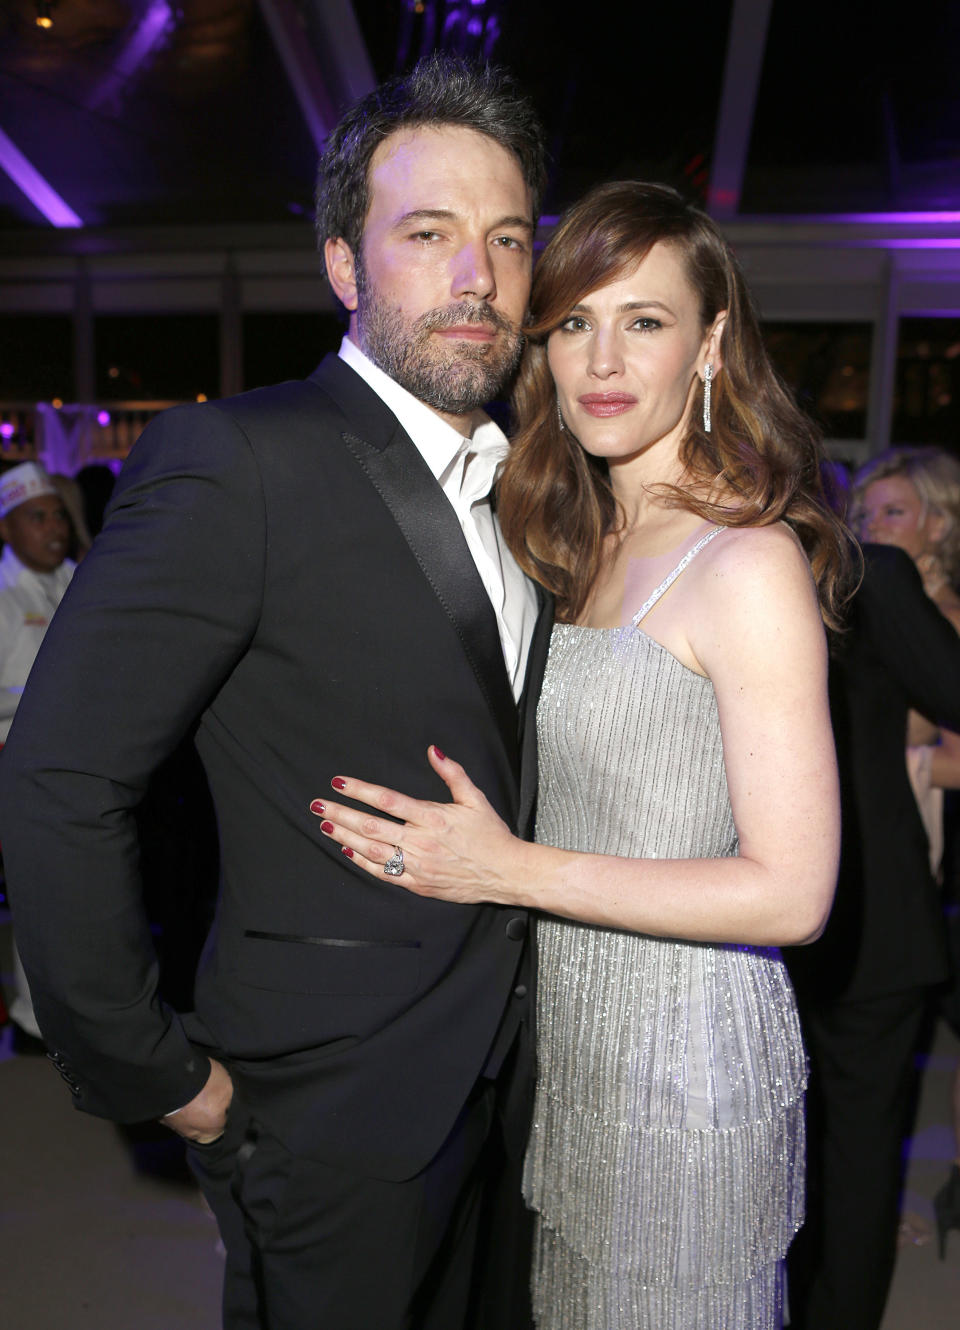 Affleck poses for a picture with Garner's hand on his waist